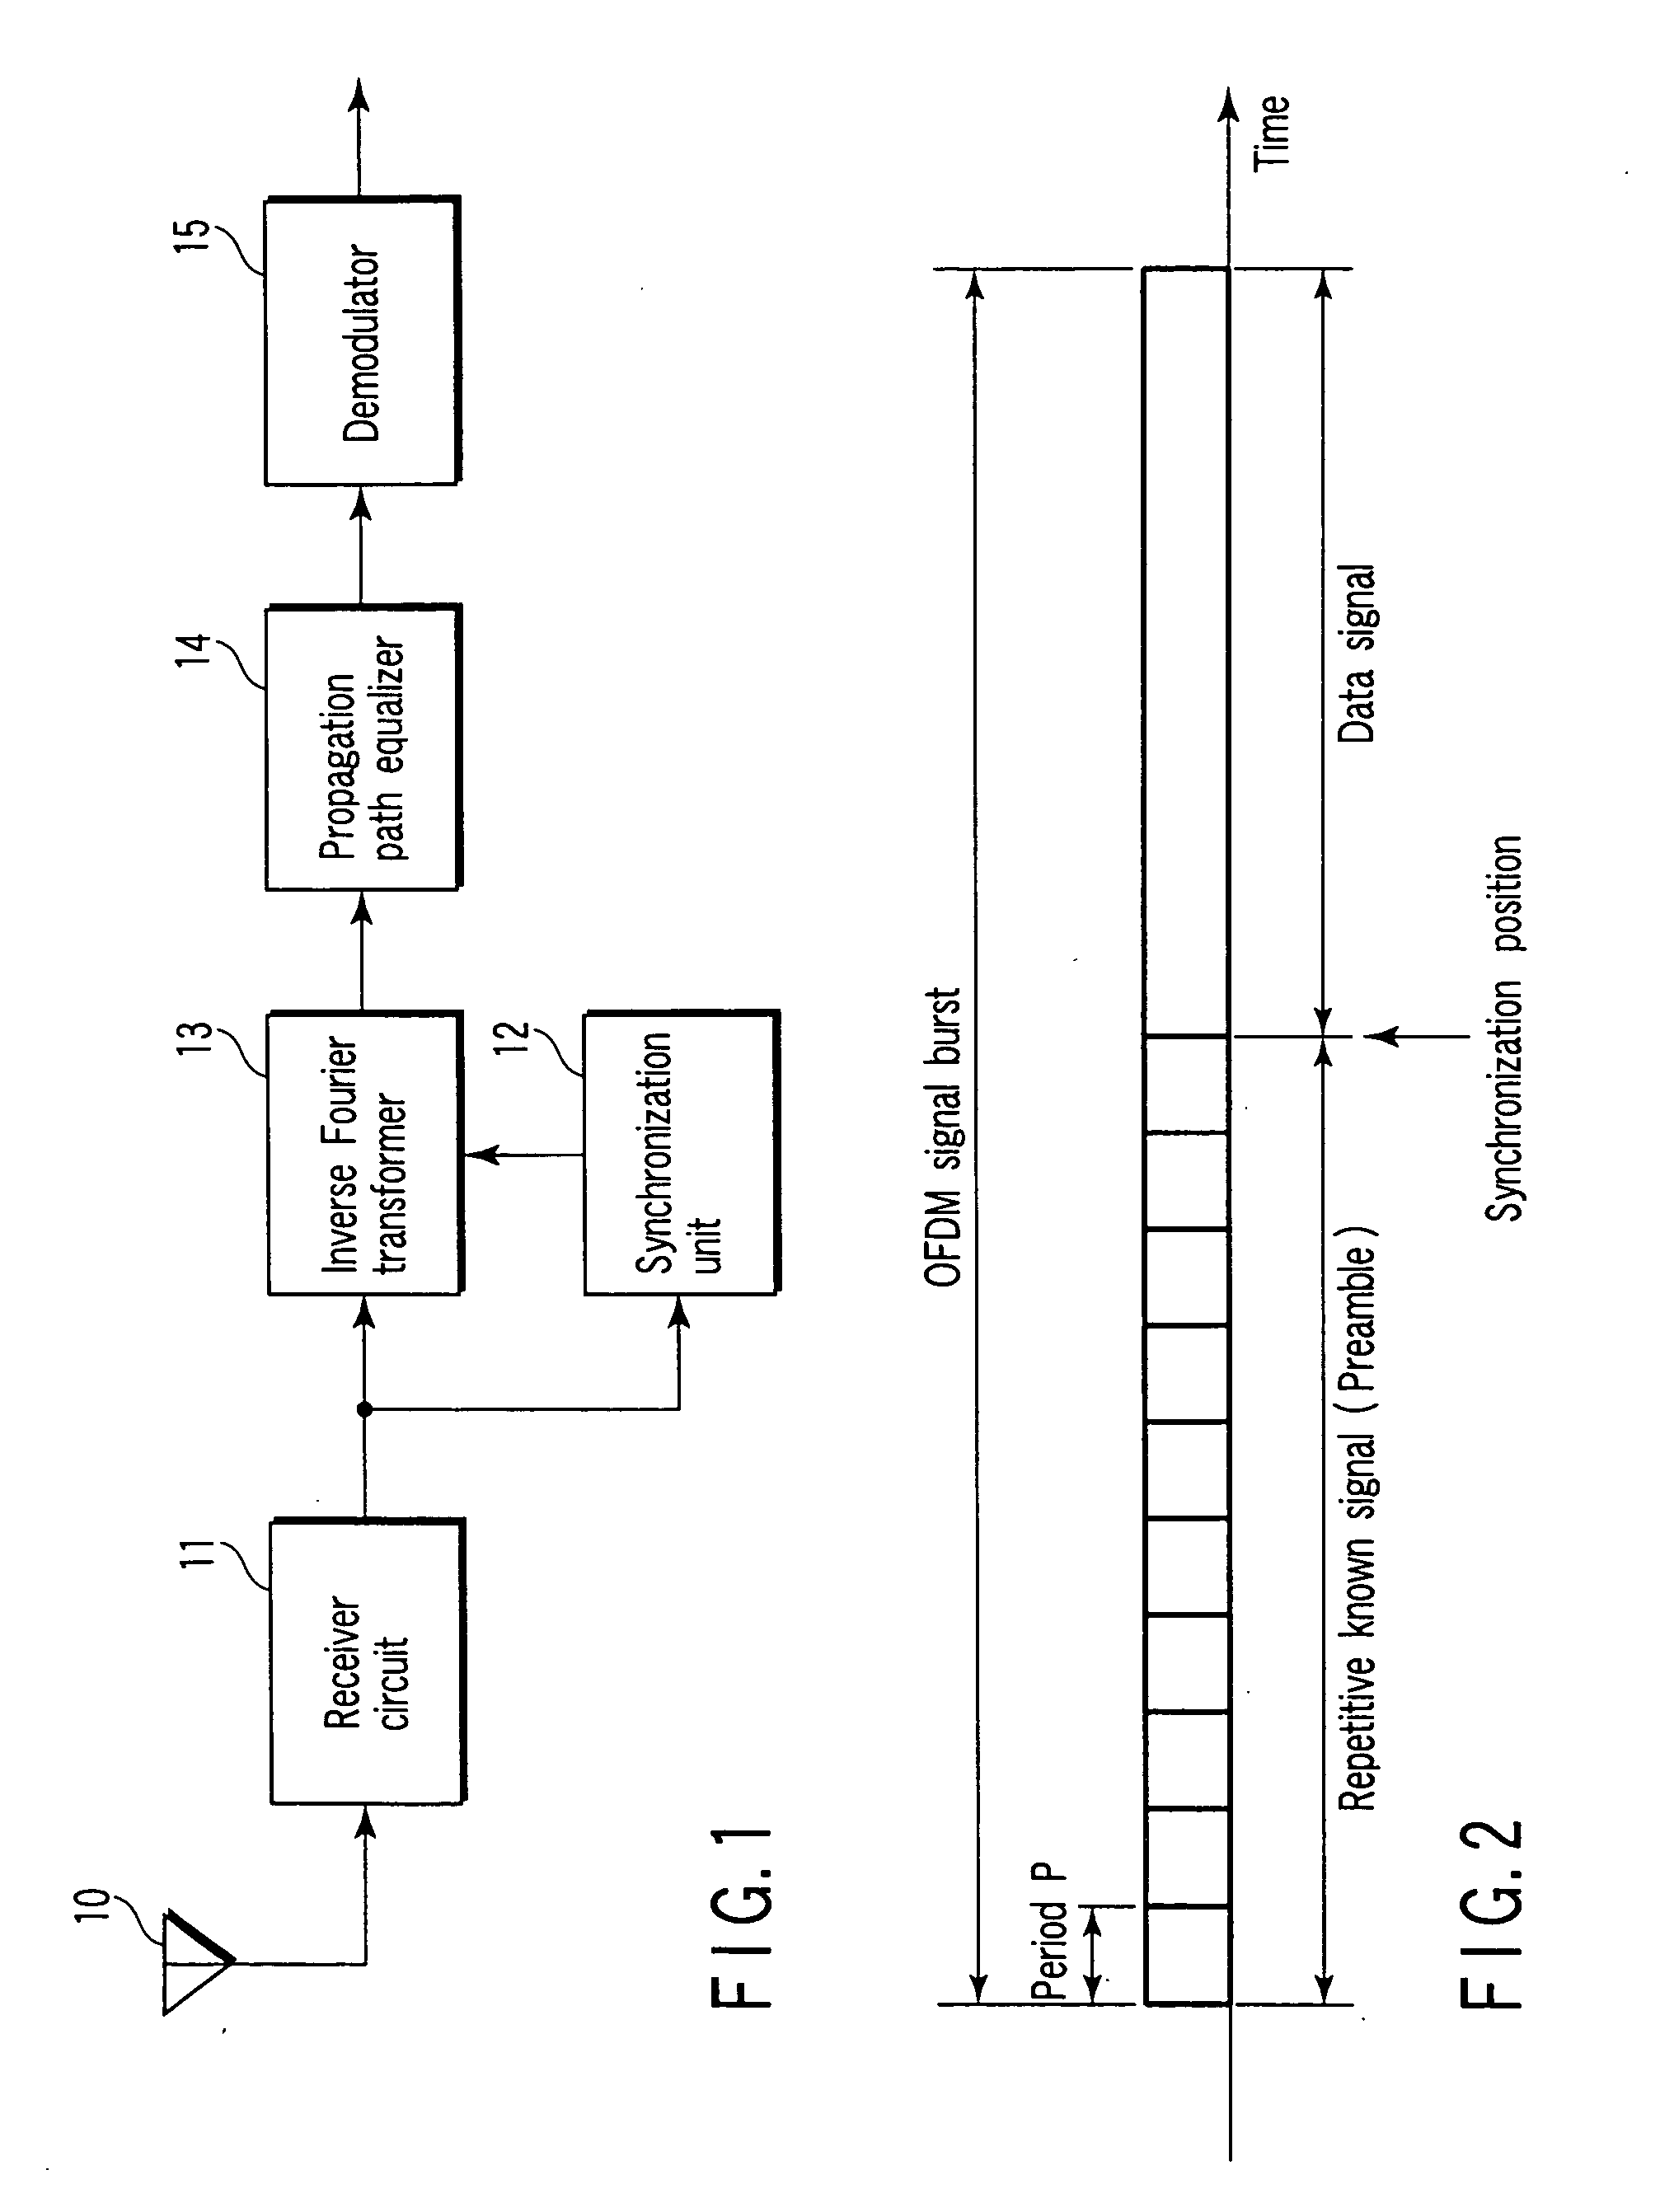 Receiver for burst signal including known signal